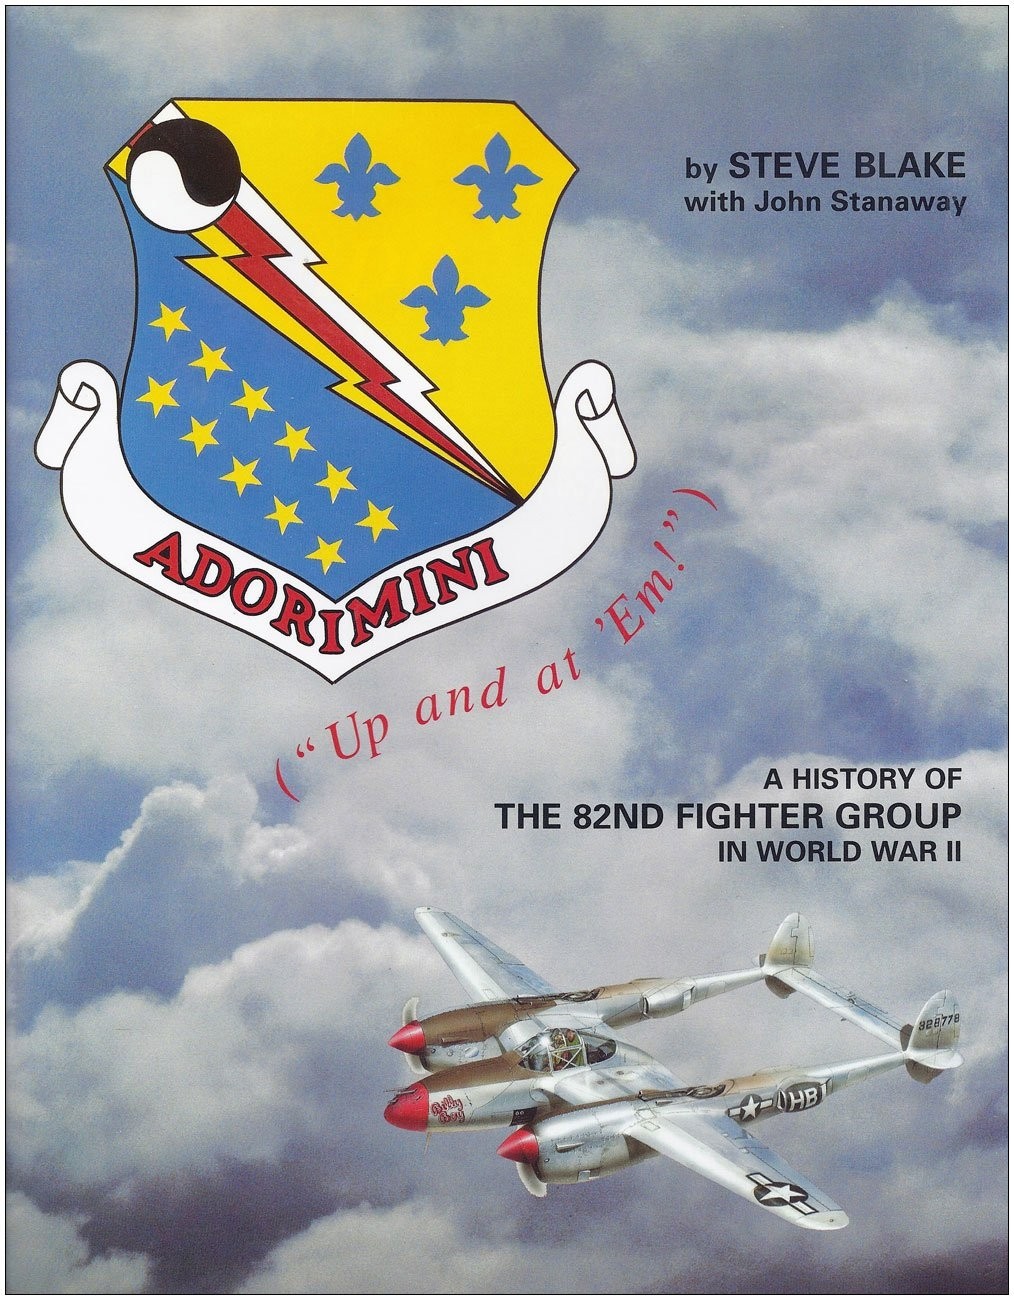 Adorimini ("up and at 'em!"): A history of the 82nd Fighter Group in WWII (SIGNED)